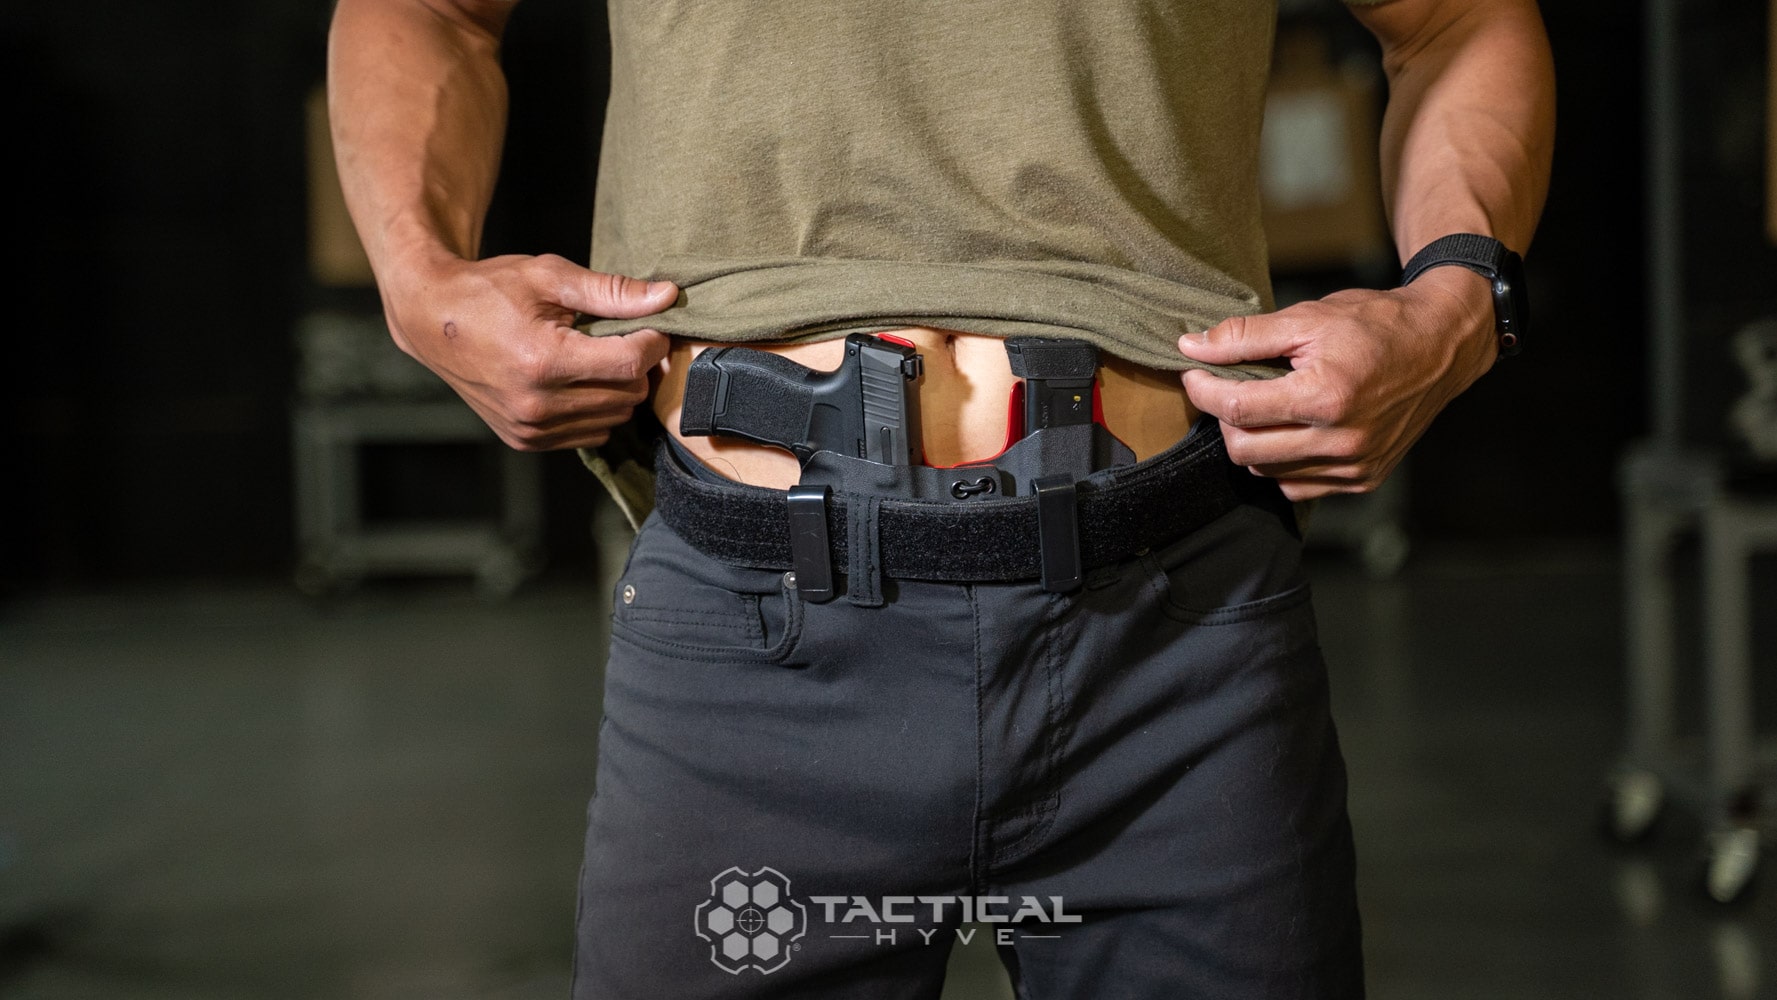 4 Things An Appendix Holster Should Have » Concealed Carry Inc